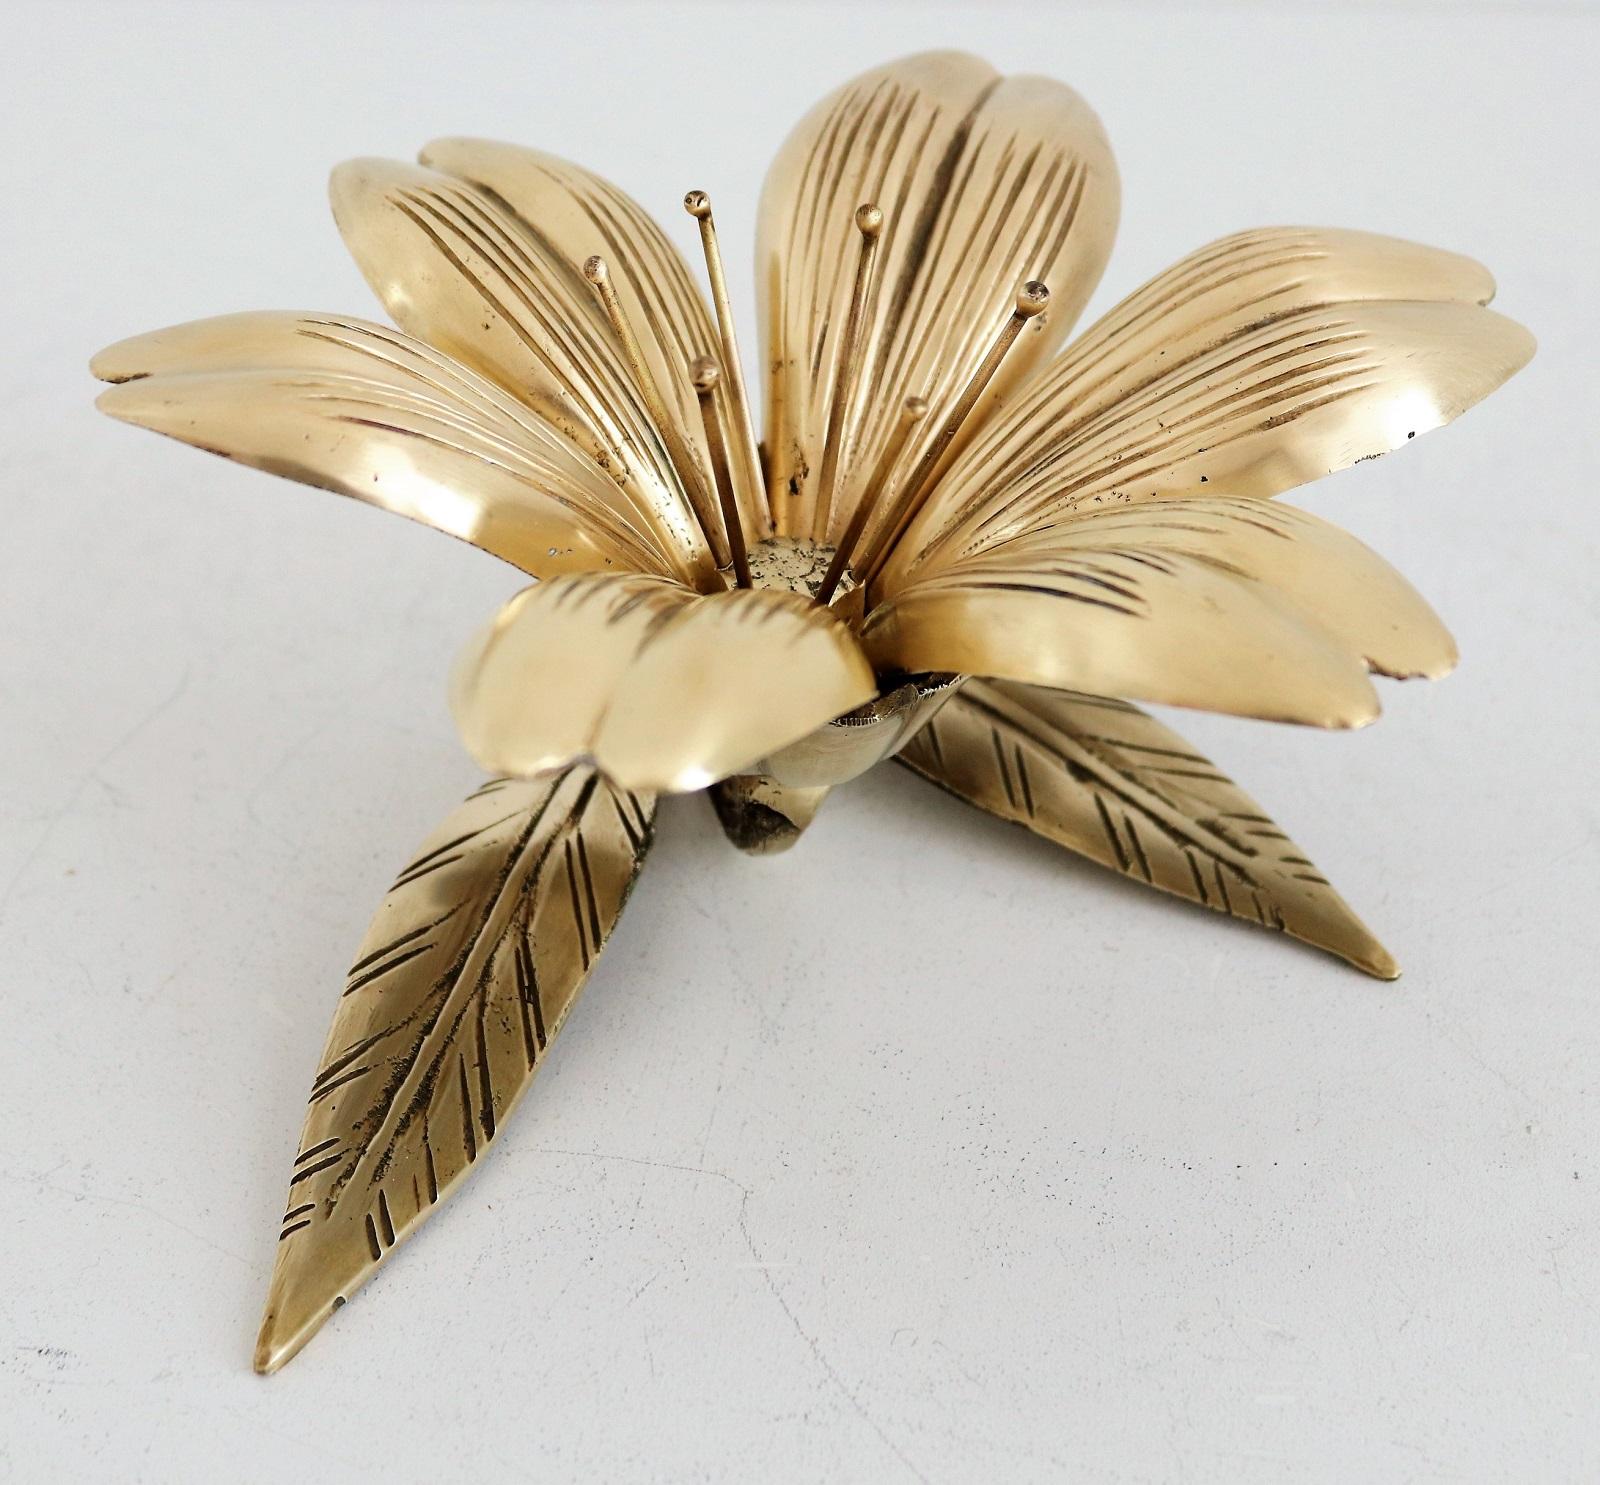 Italian Midcentury Flower in Brass with Petal Ashtrays for Cigarettes, 1950s 12